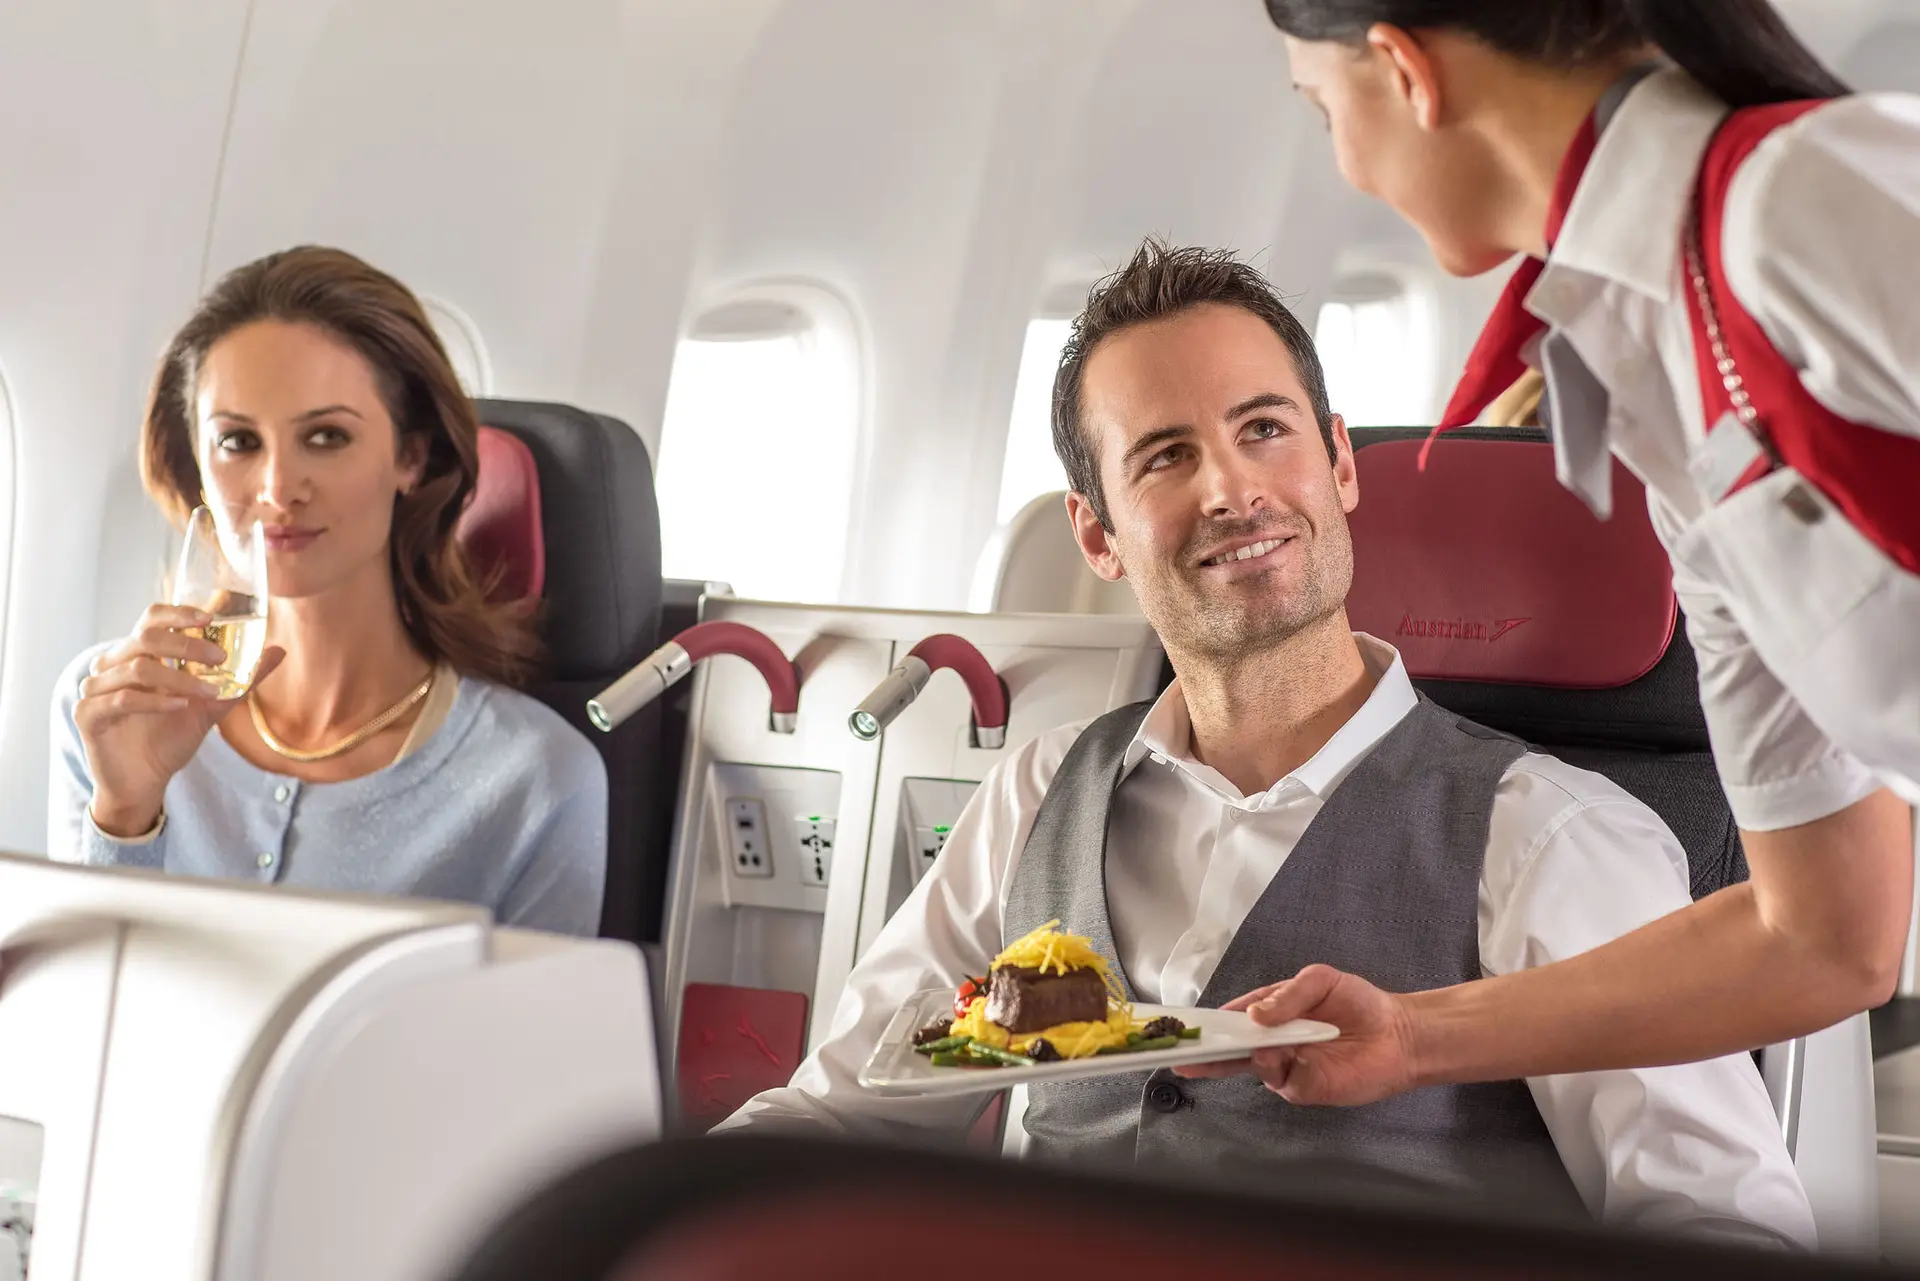 Airline review Cuisine - Austrian Airlines - 7